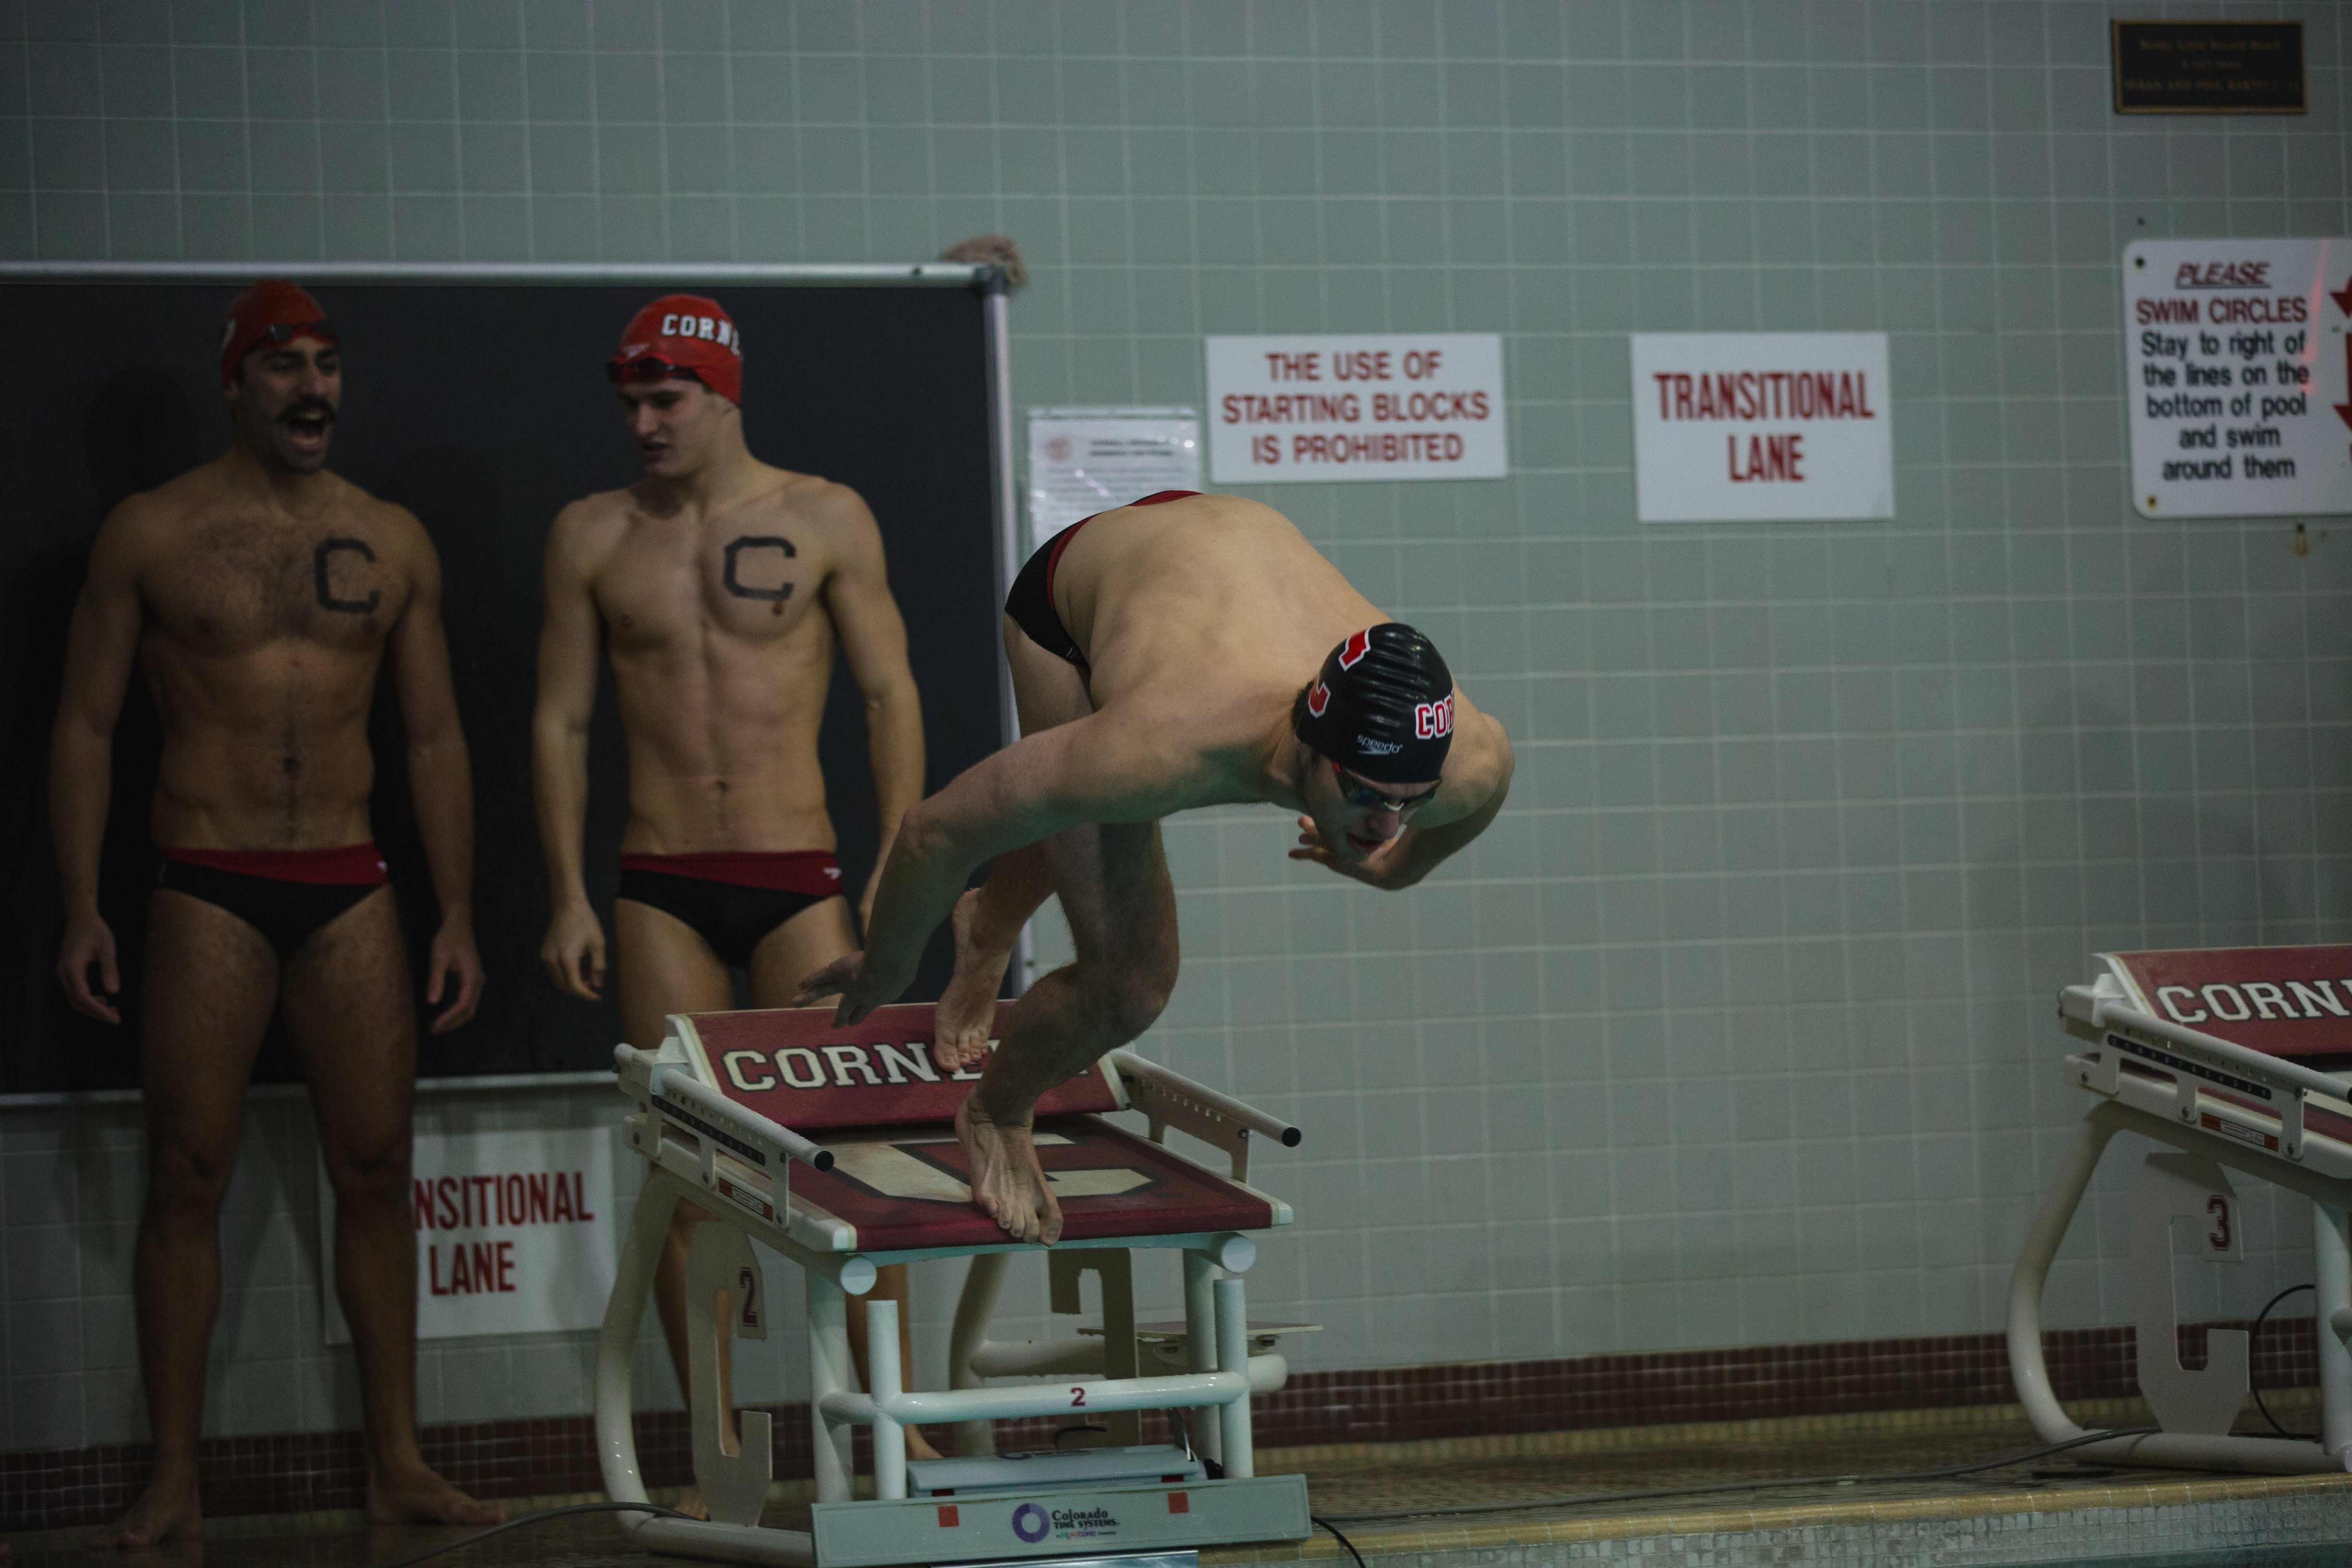 Psyching each other up during our 4x100 free relay during our Harvard/Dartmouth Meet